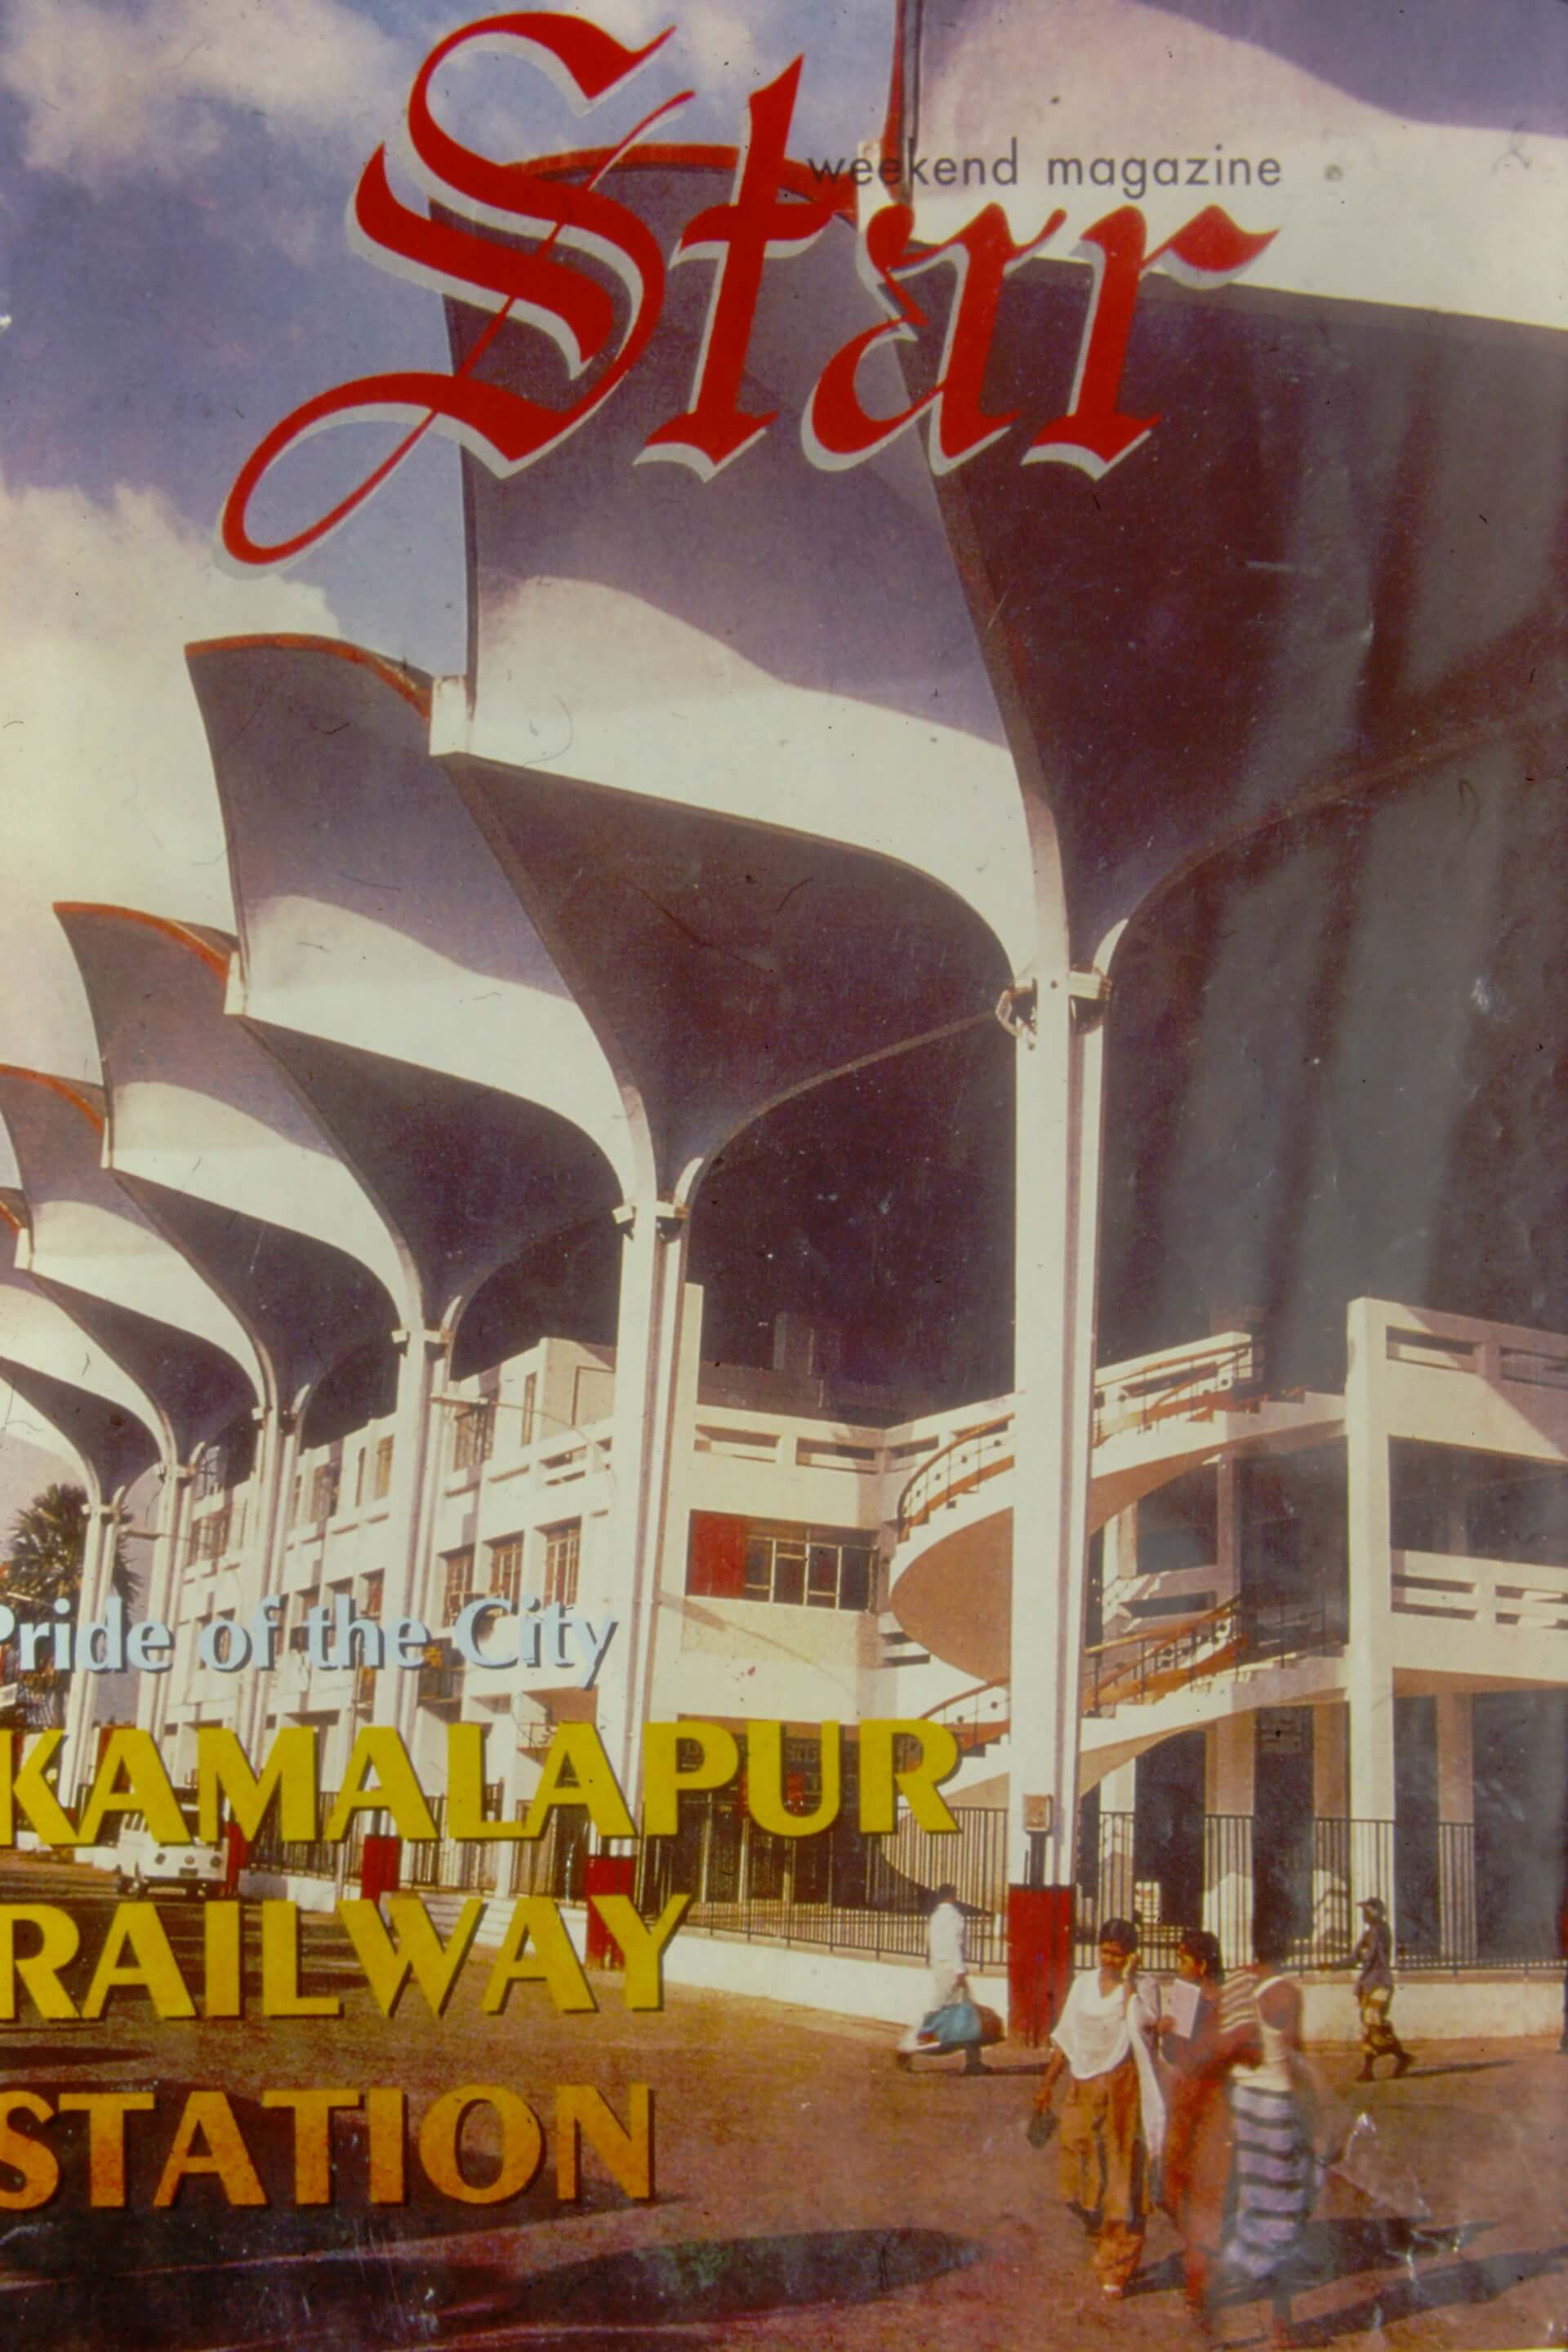 Cover of a magazine with the rail station on it